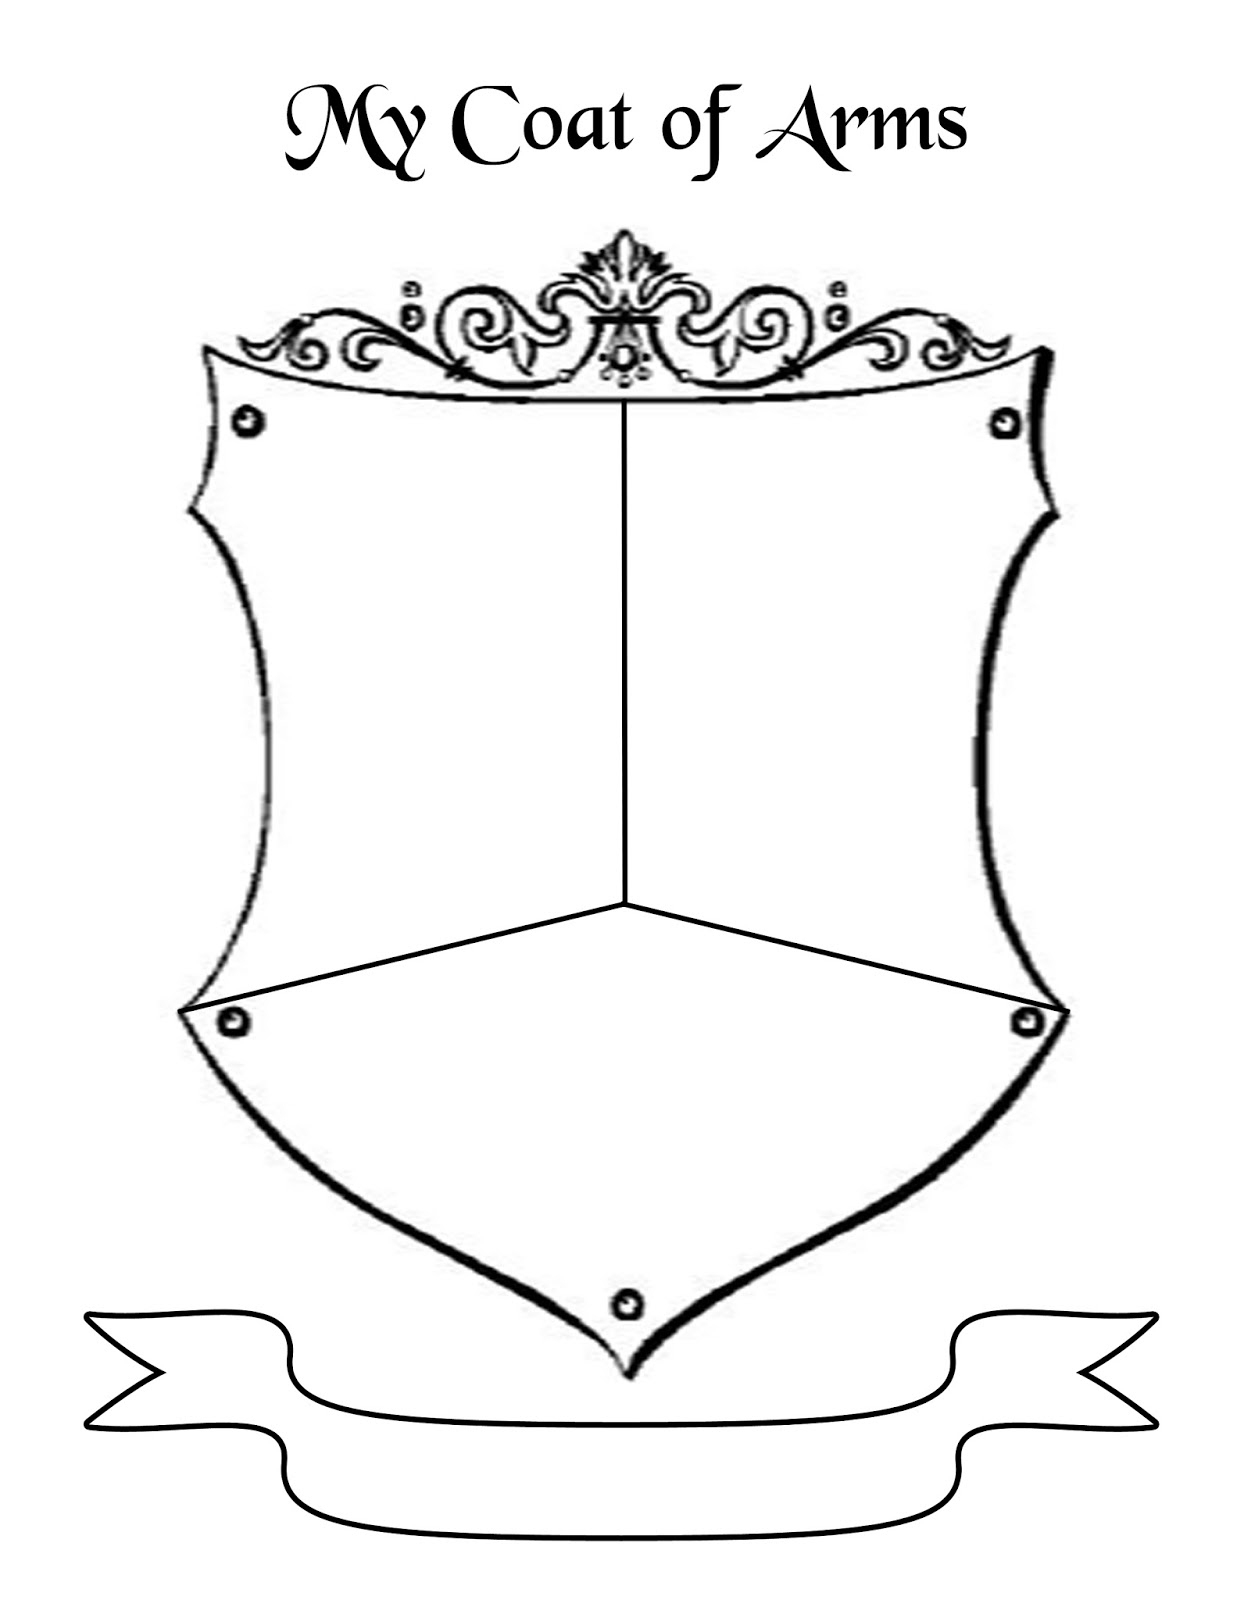 Coat Of Arms Template Cliparts co Printable Coat Of Arms Worksheet 